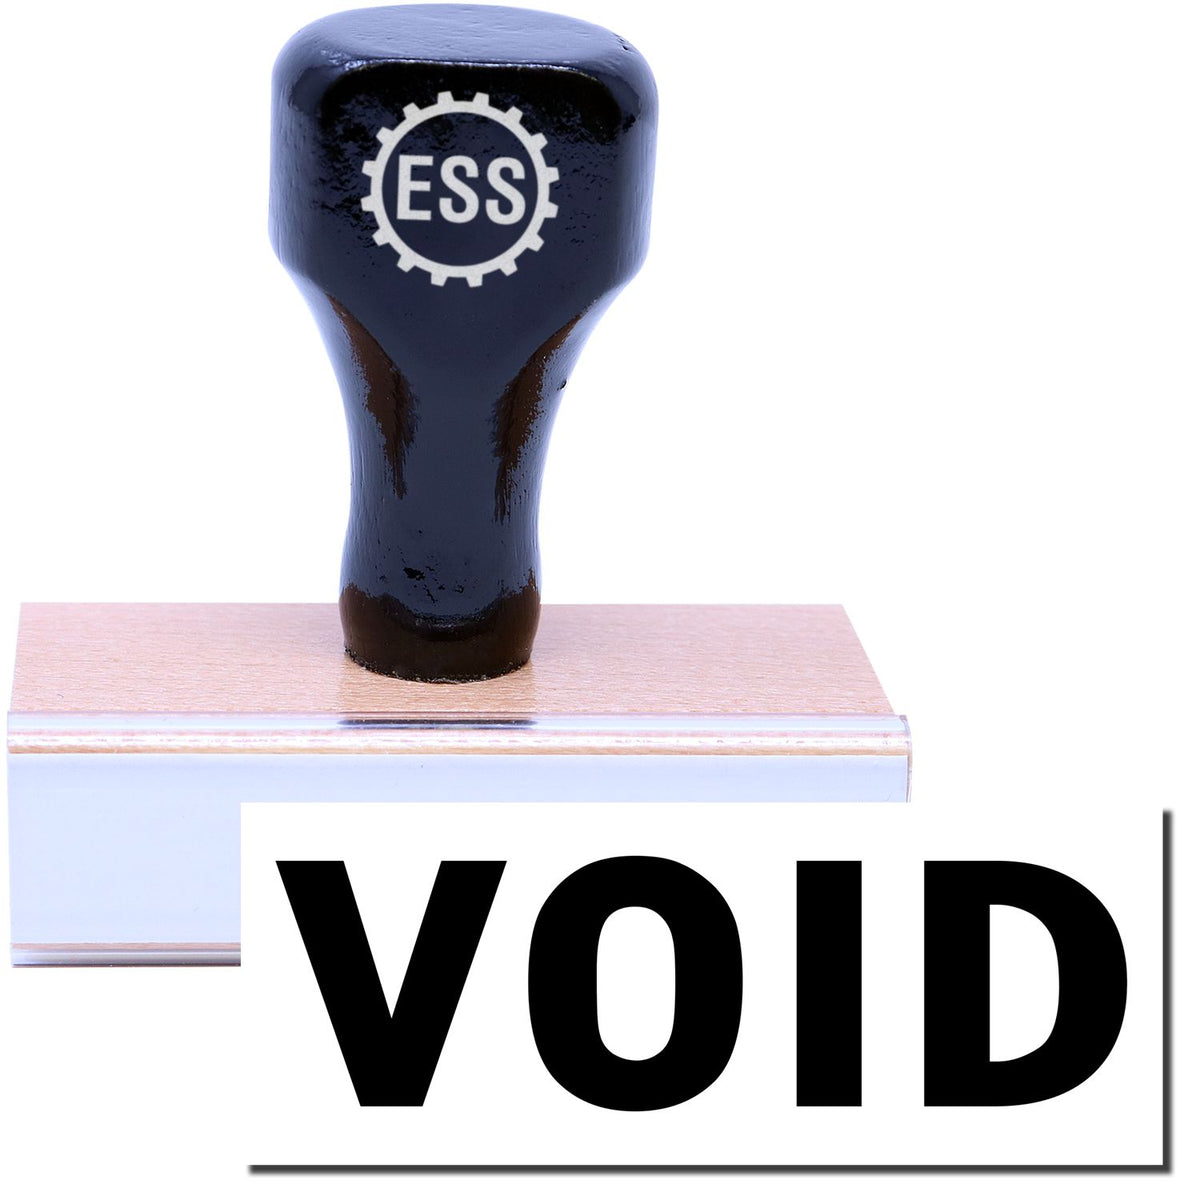 A stock office rubber stamp with a stamped image showing how the text &quot;VOID&quot; is displayed after stamping.